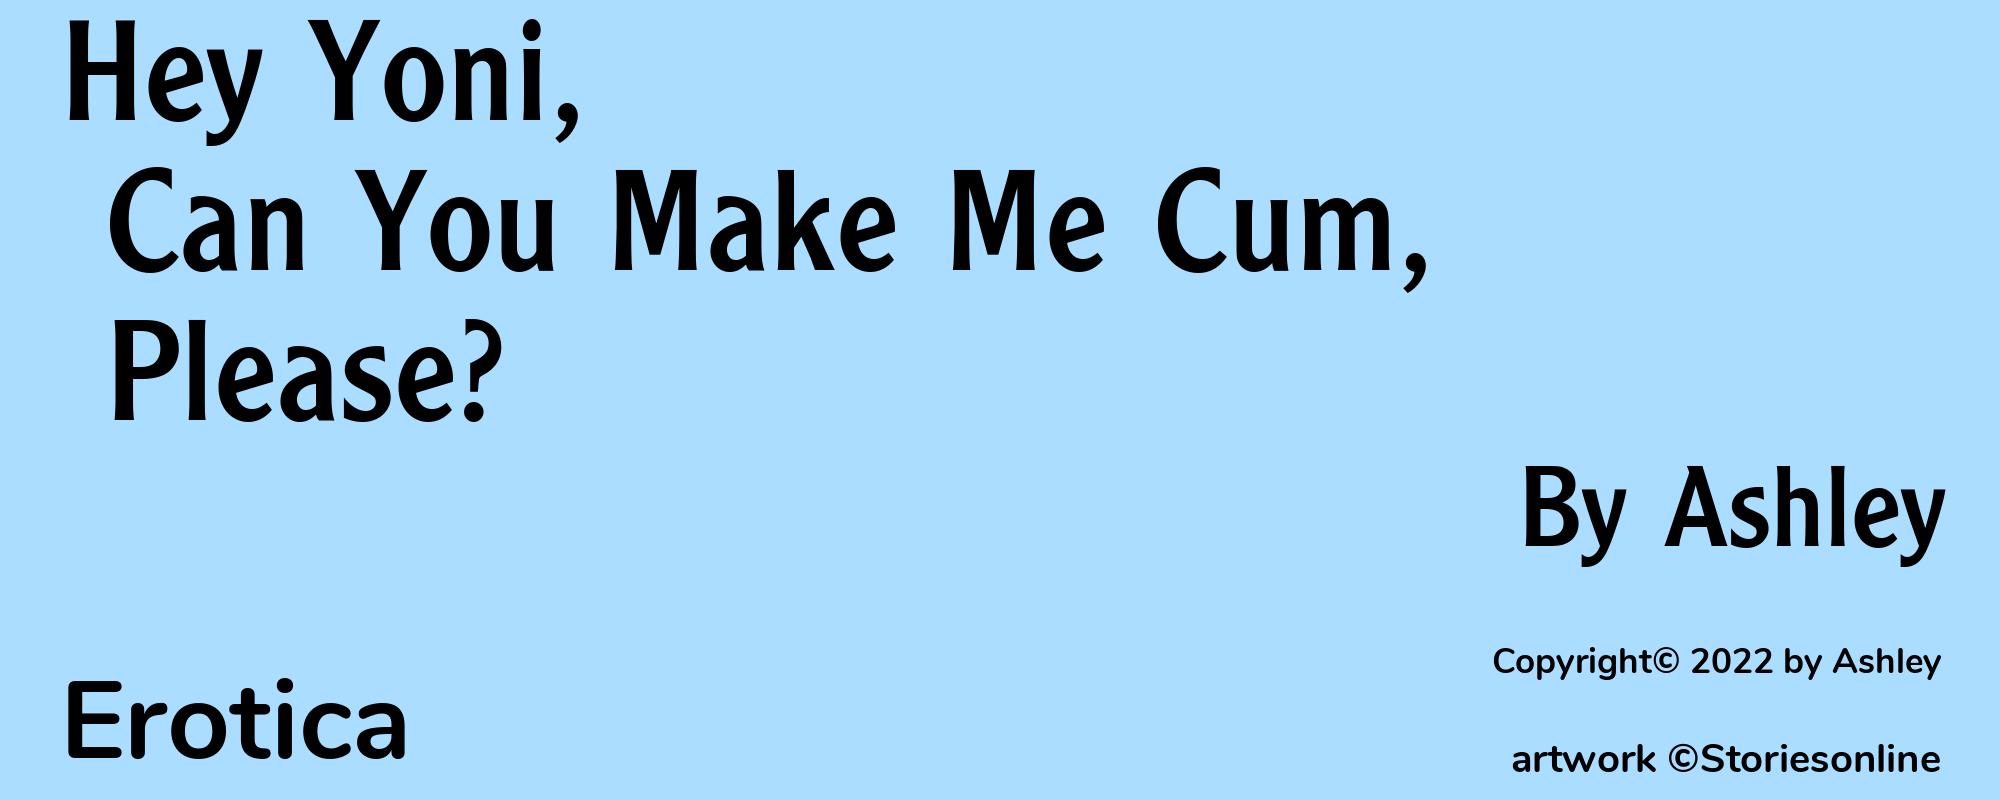 Hey Yoni, Can You Make Me Cum, Please? - Cover